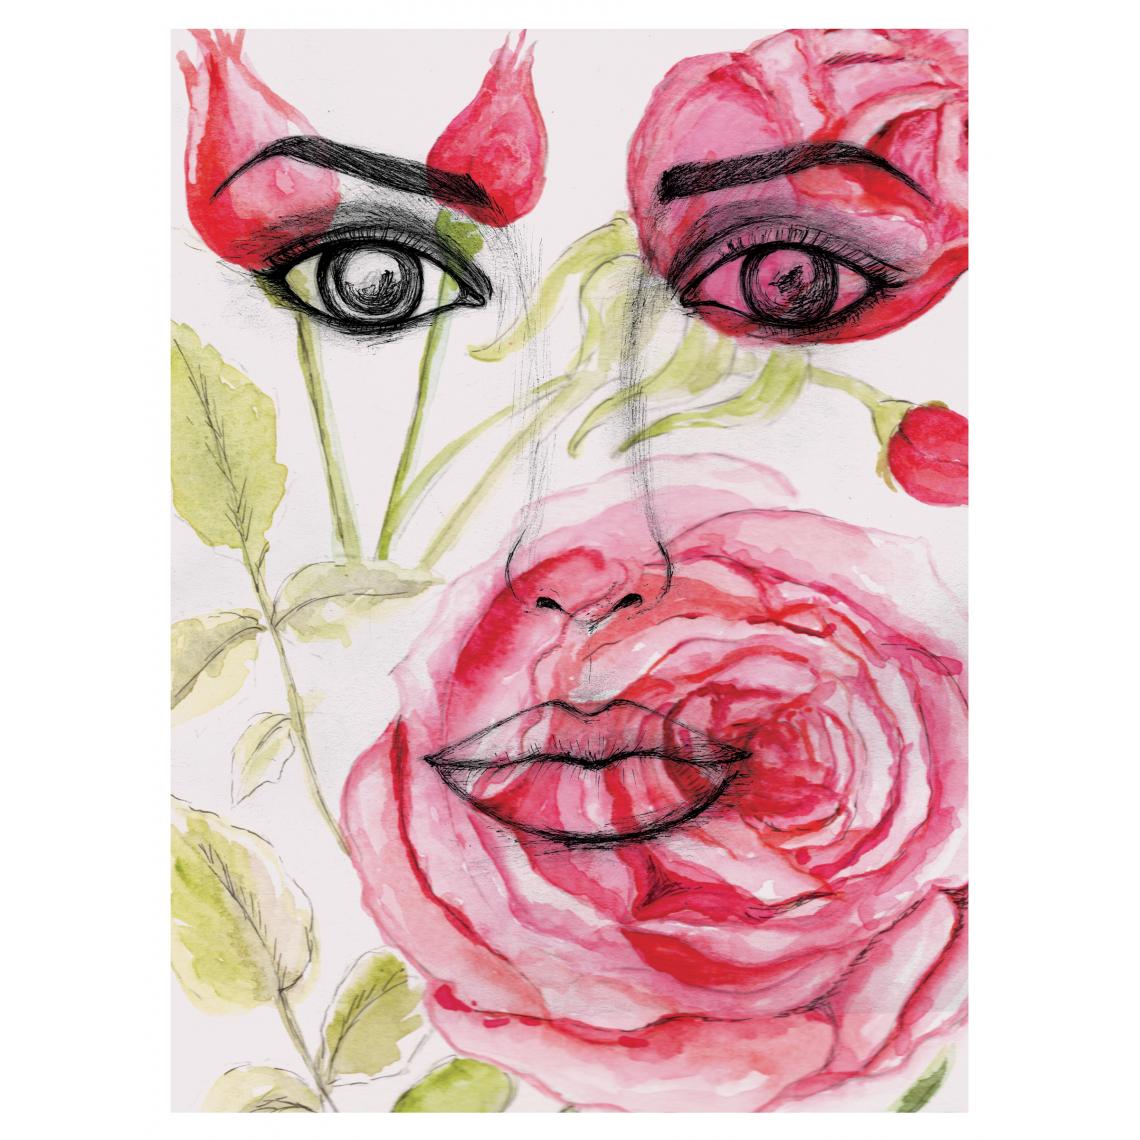 Beneffito - ART - Signature Poster - Rose - 21x30 cm - Affiches, posters